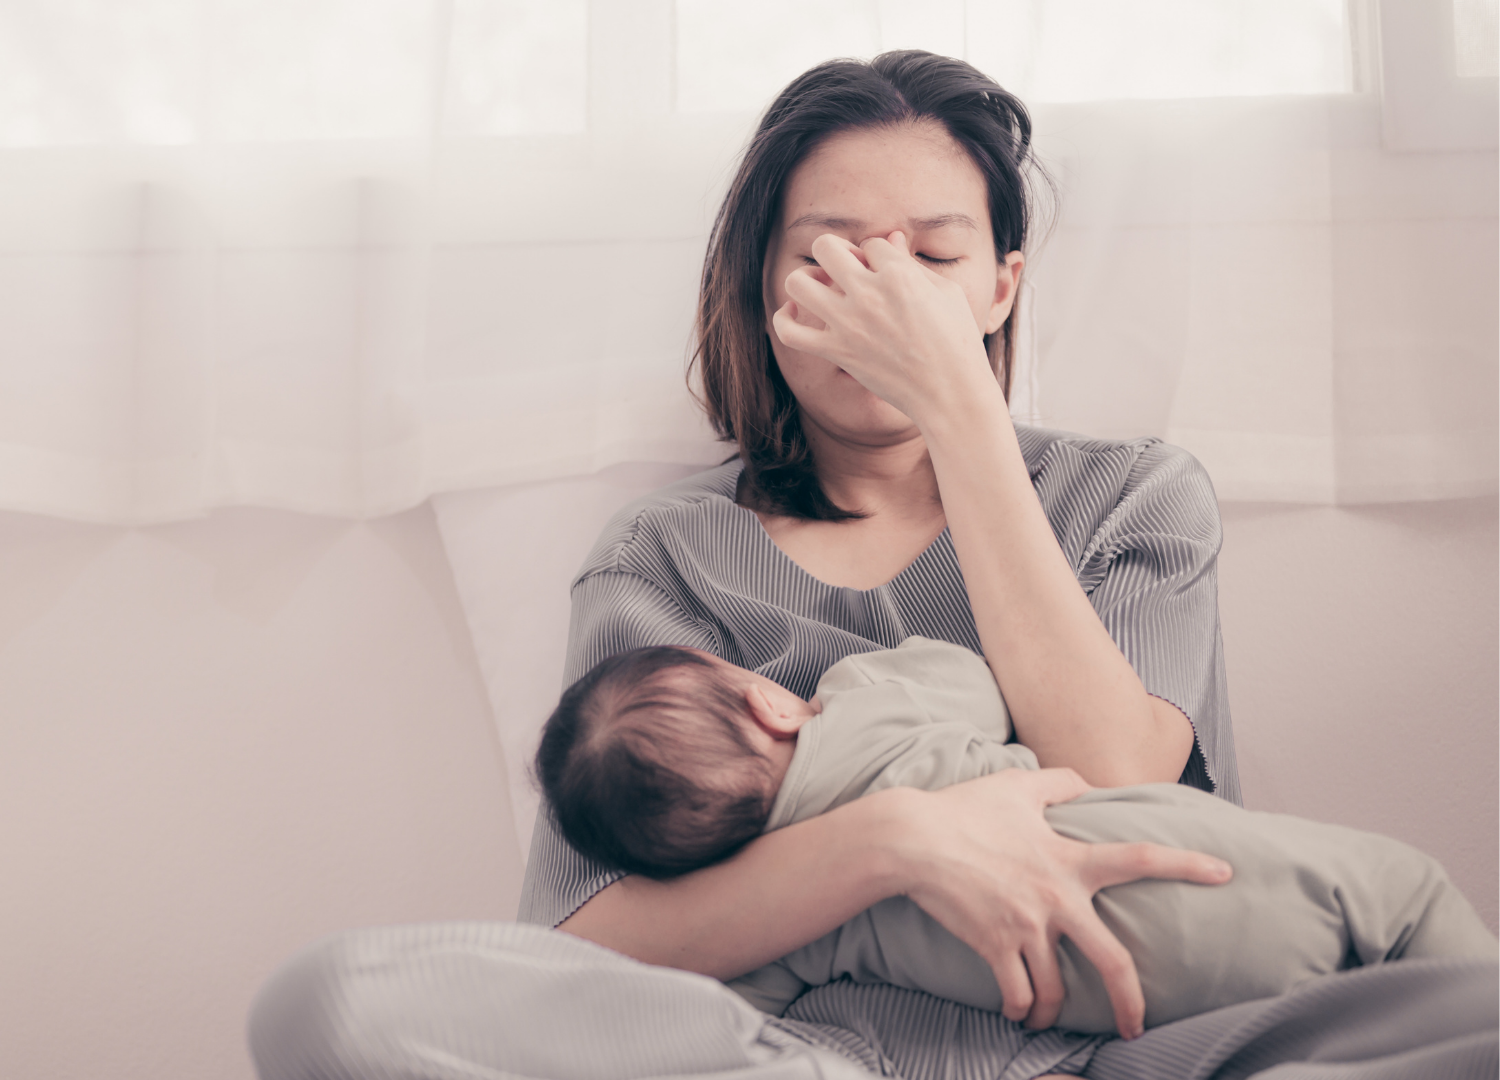 All About Perinatal Mood Disorders- Complete Overview, Symptoms & Resources